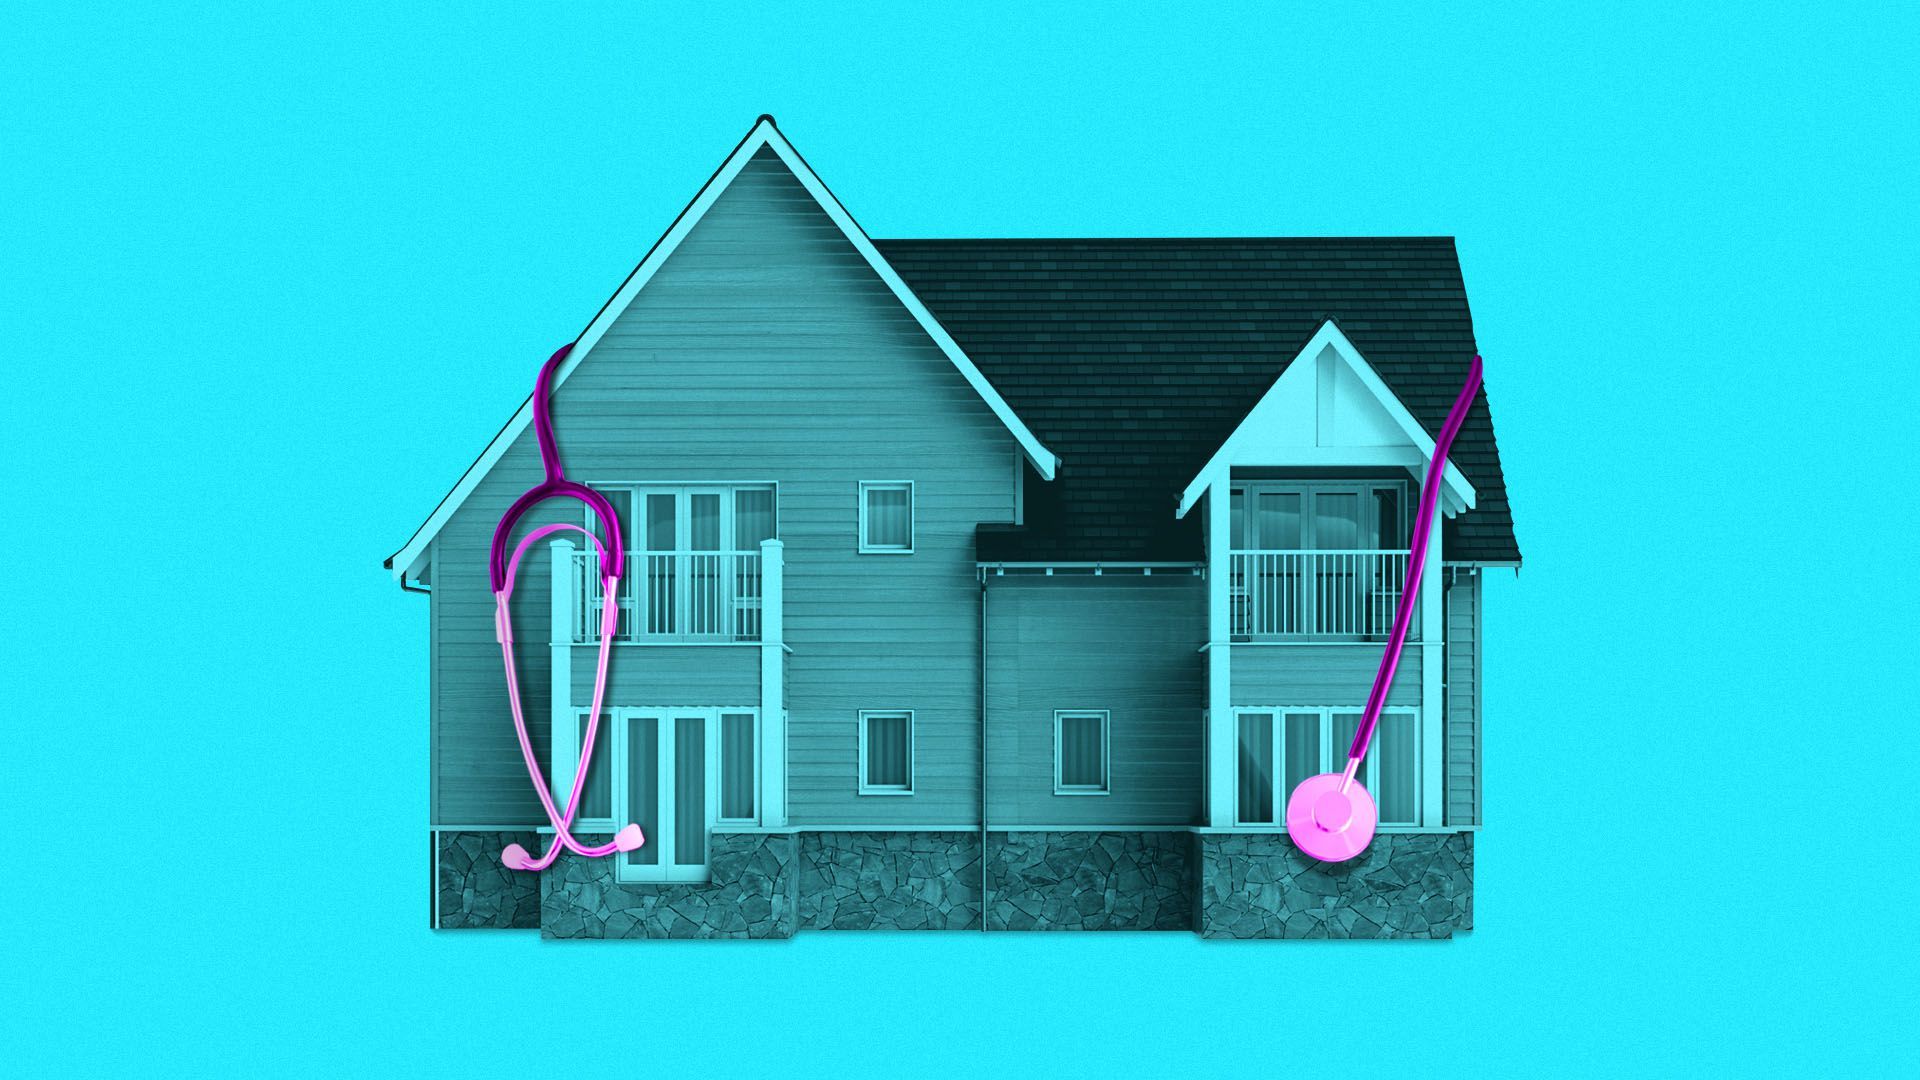 Illustration of a house wearing a stethoscope